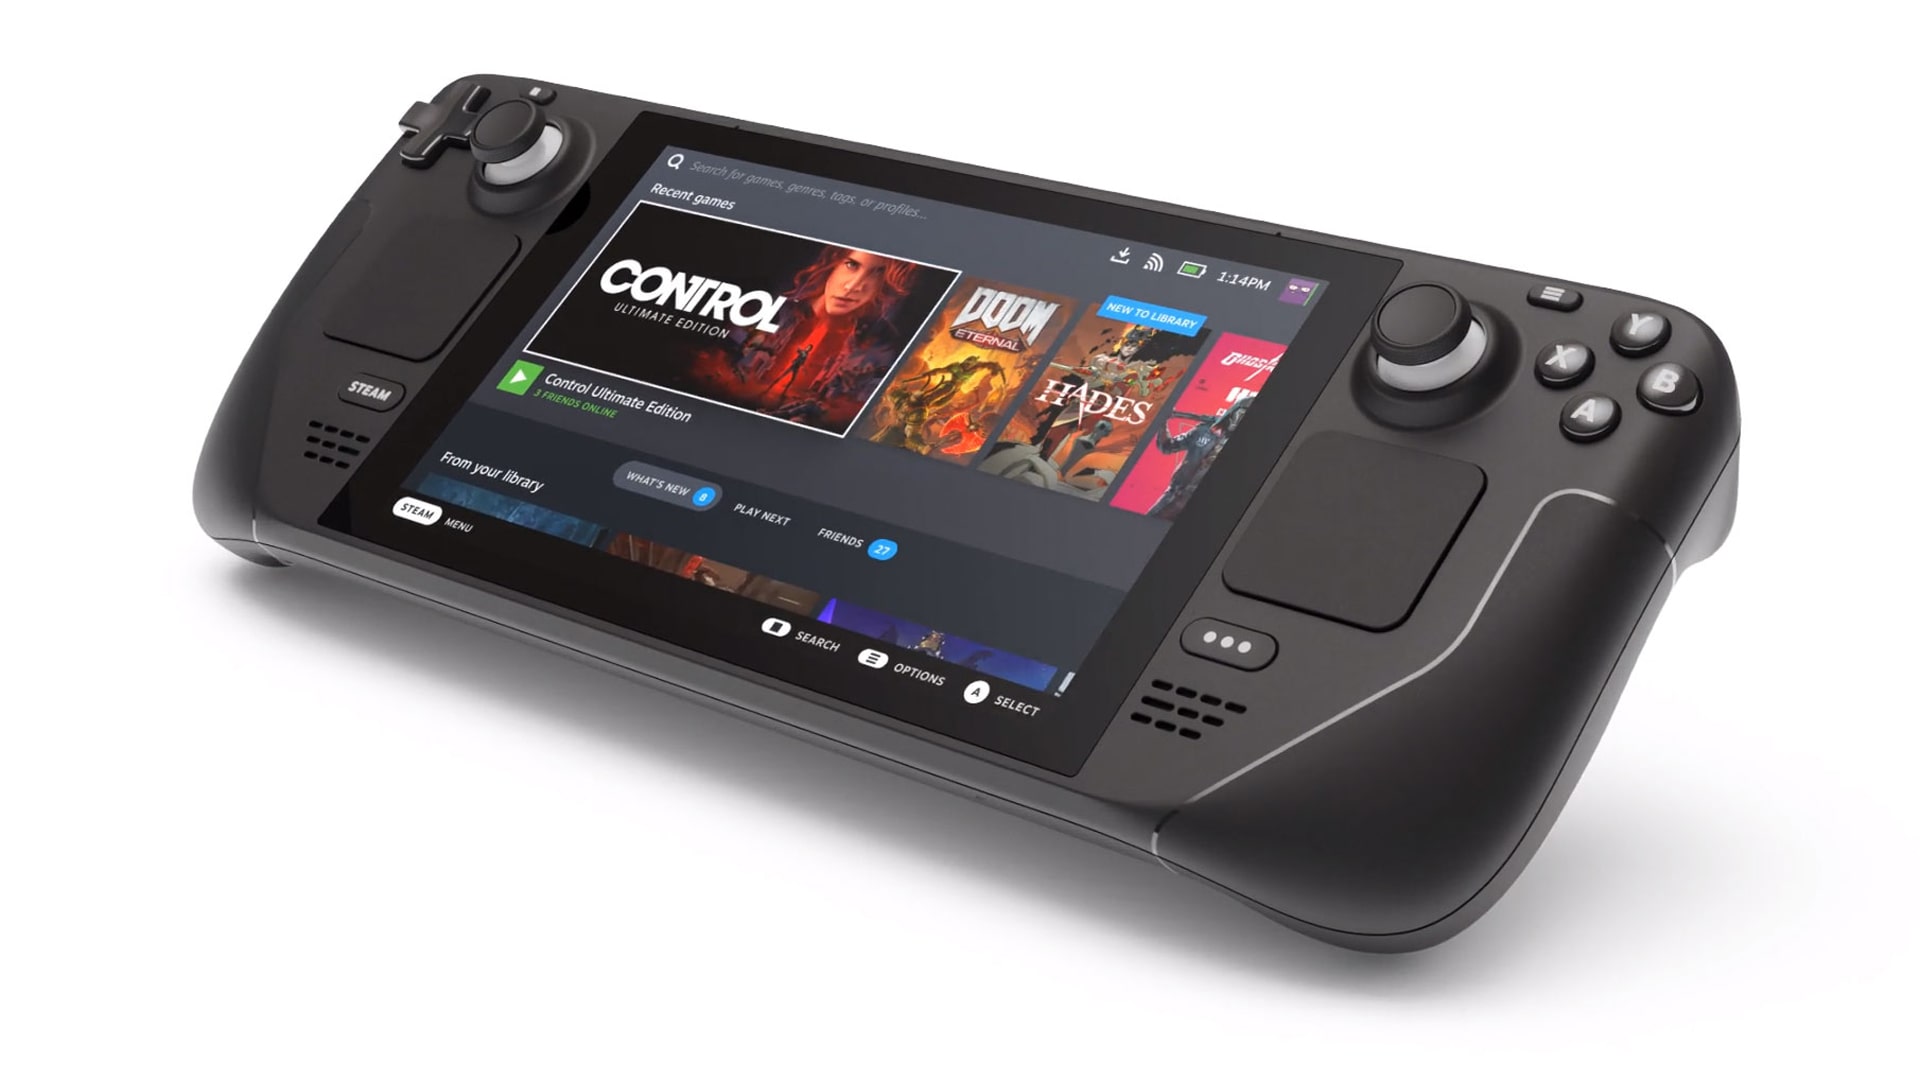 Image of the Steam Deck handheld gaming console